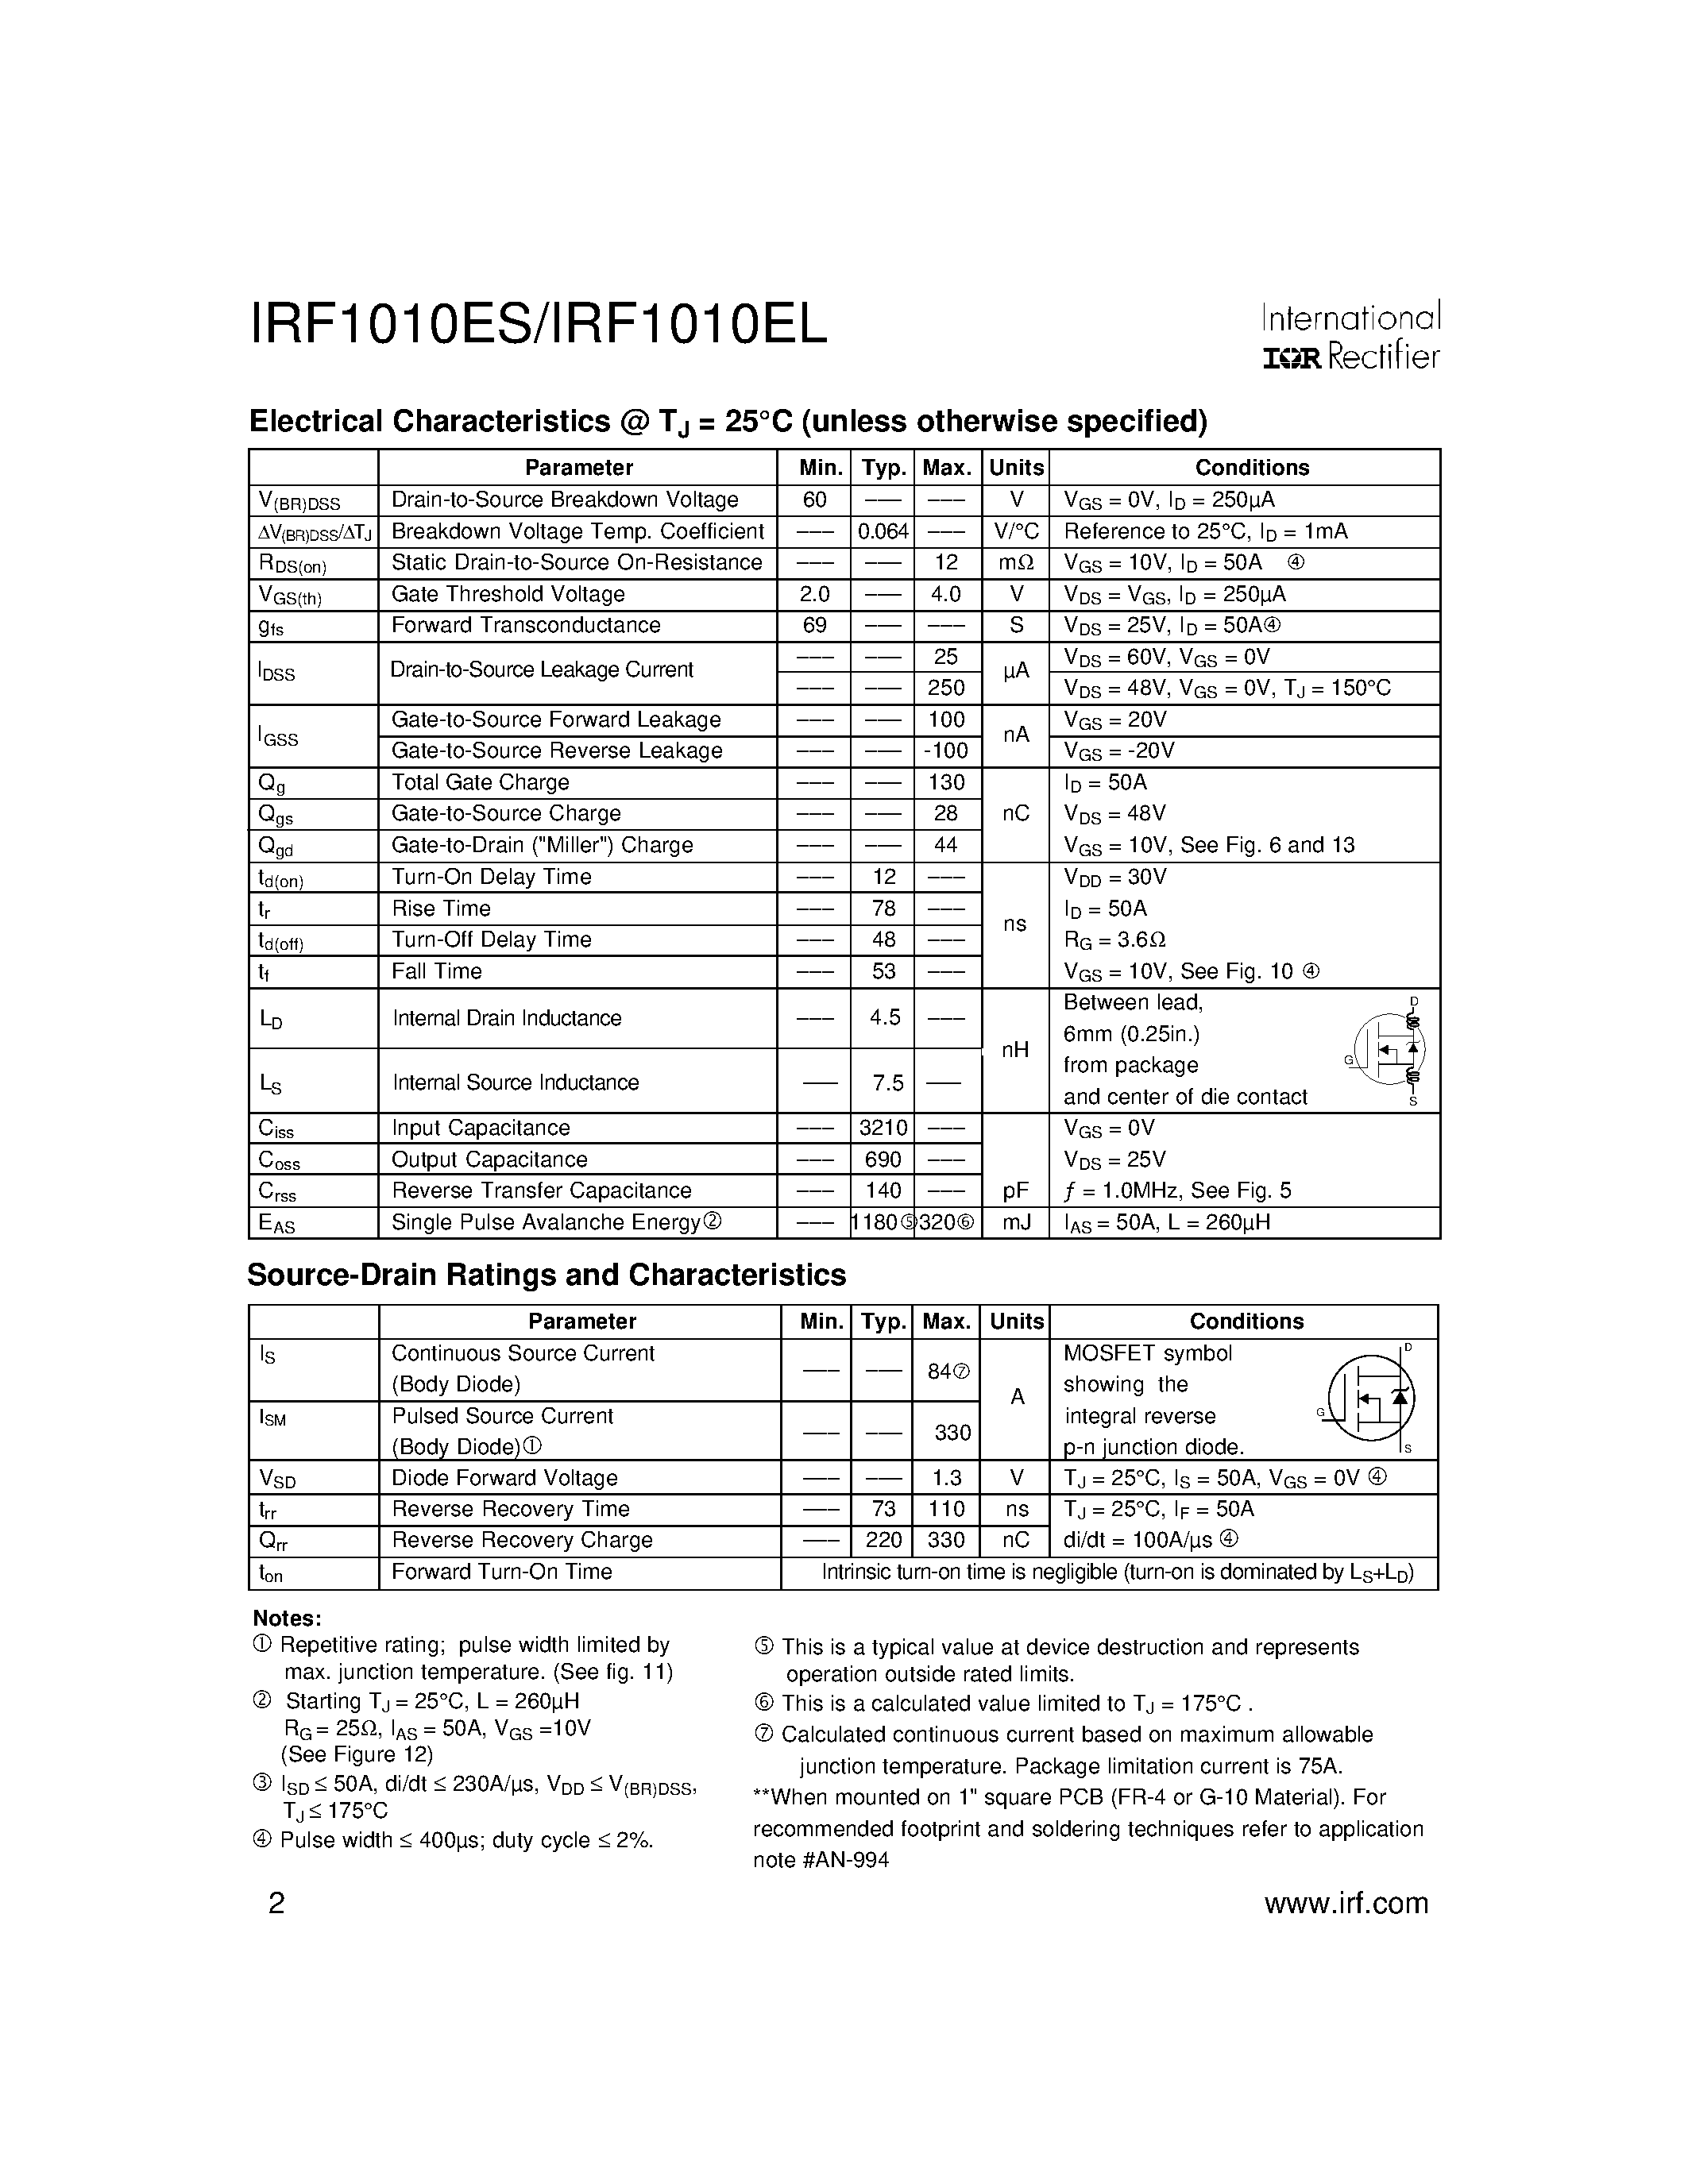 Datasheet IRF1010ES - Power MOSFET(Vdss=60V/ Rds(on)=12mohm/ Id=84A) page 2